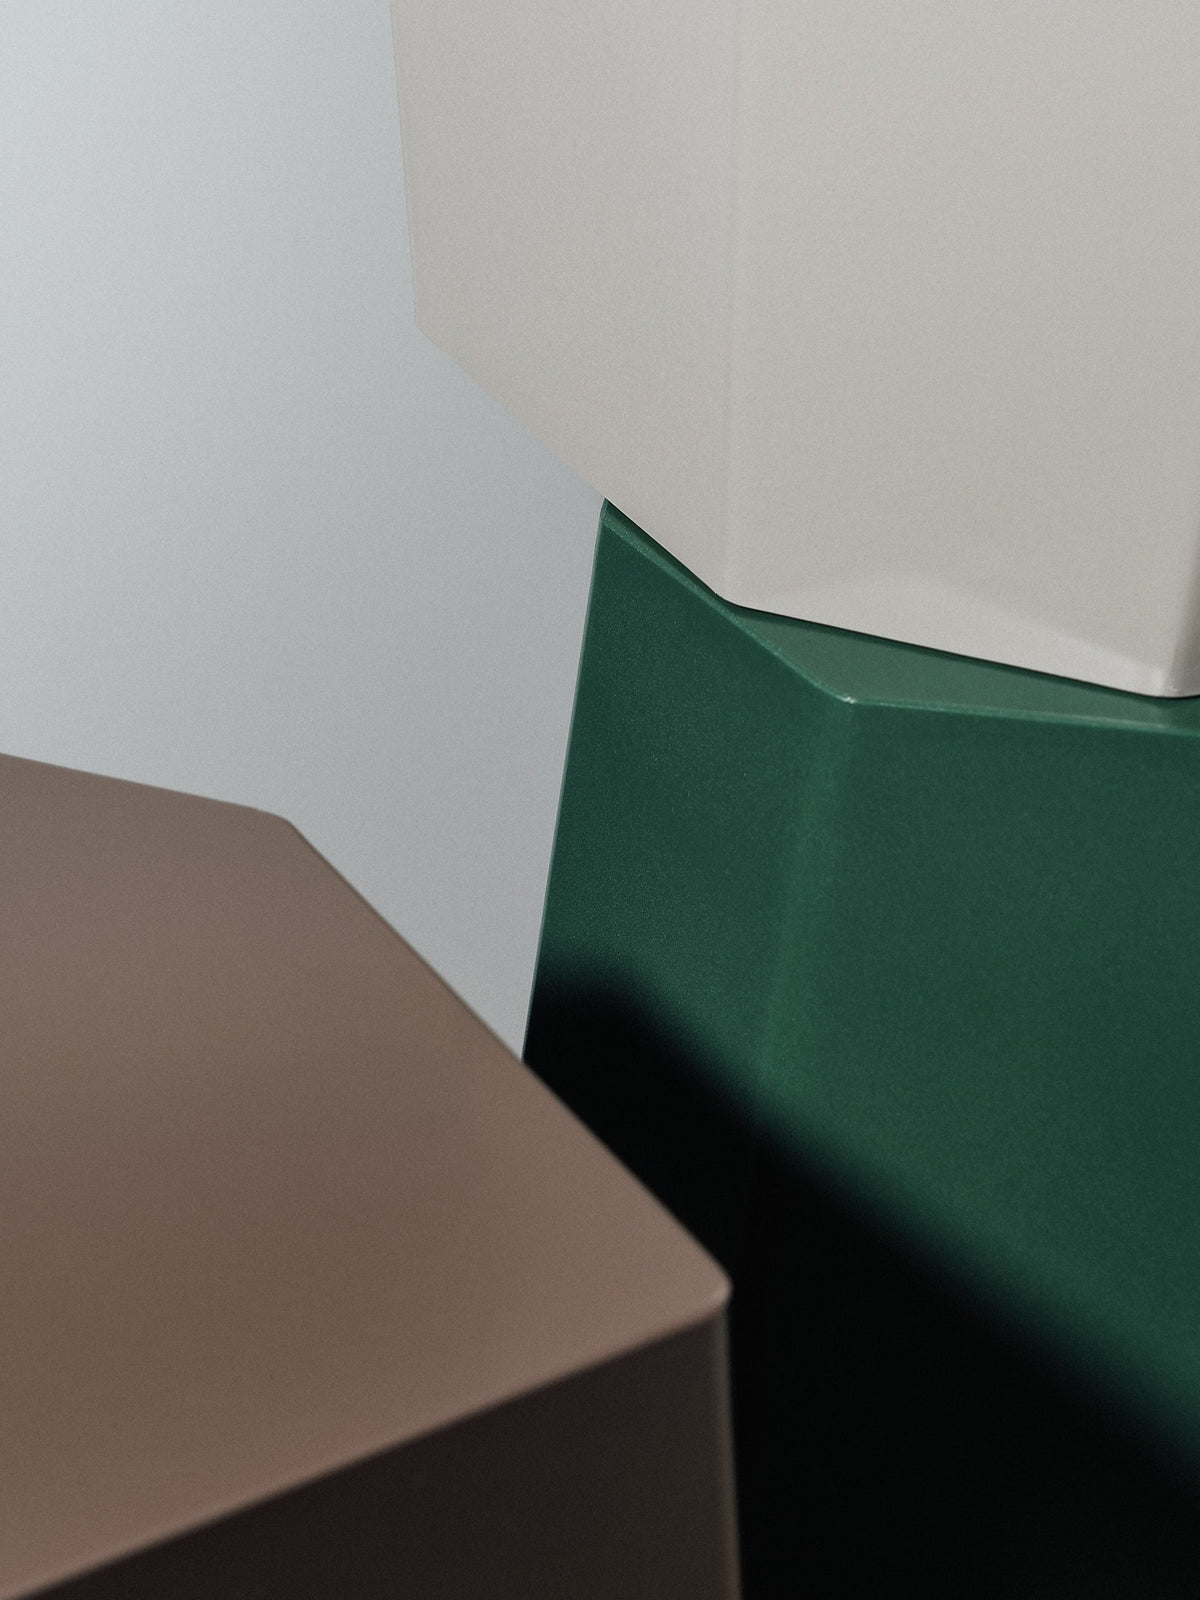 A green, brown, and beige set of Arnold Circus Stool – Cocoa side tables by Martino Gamper.